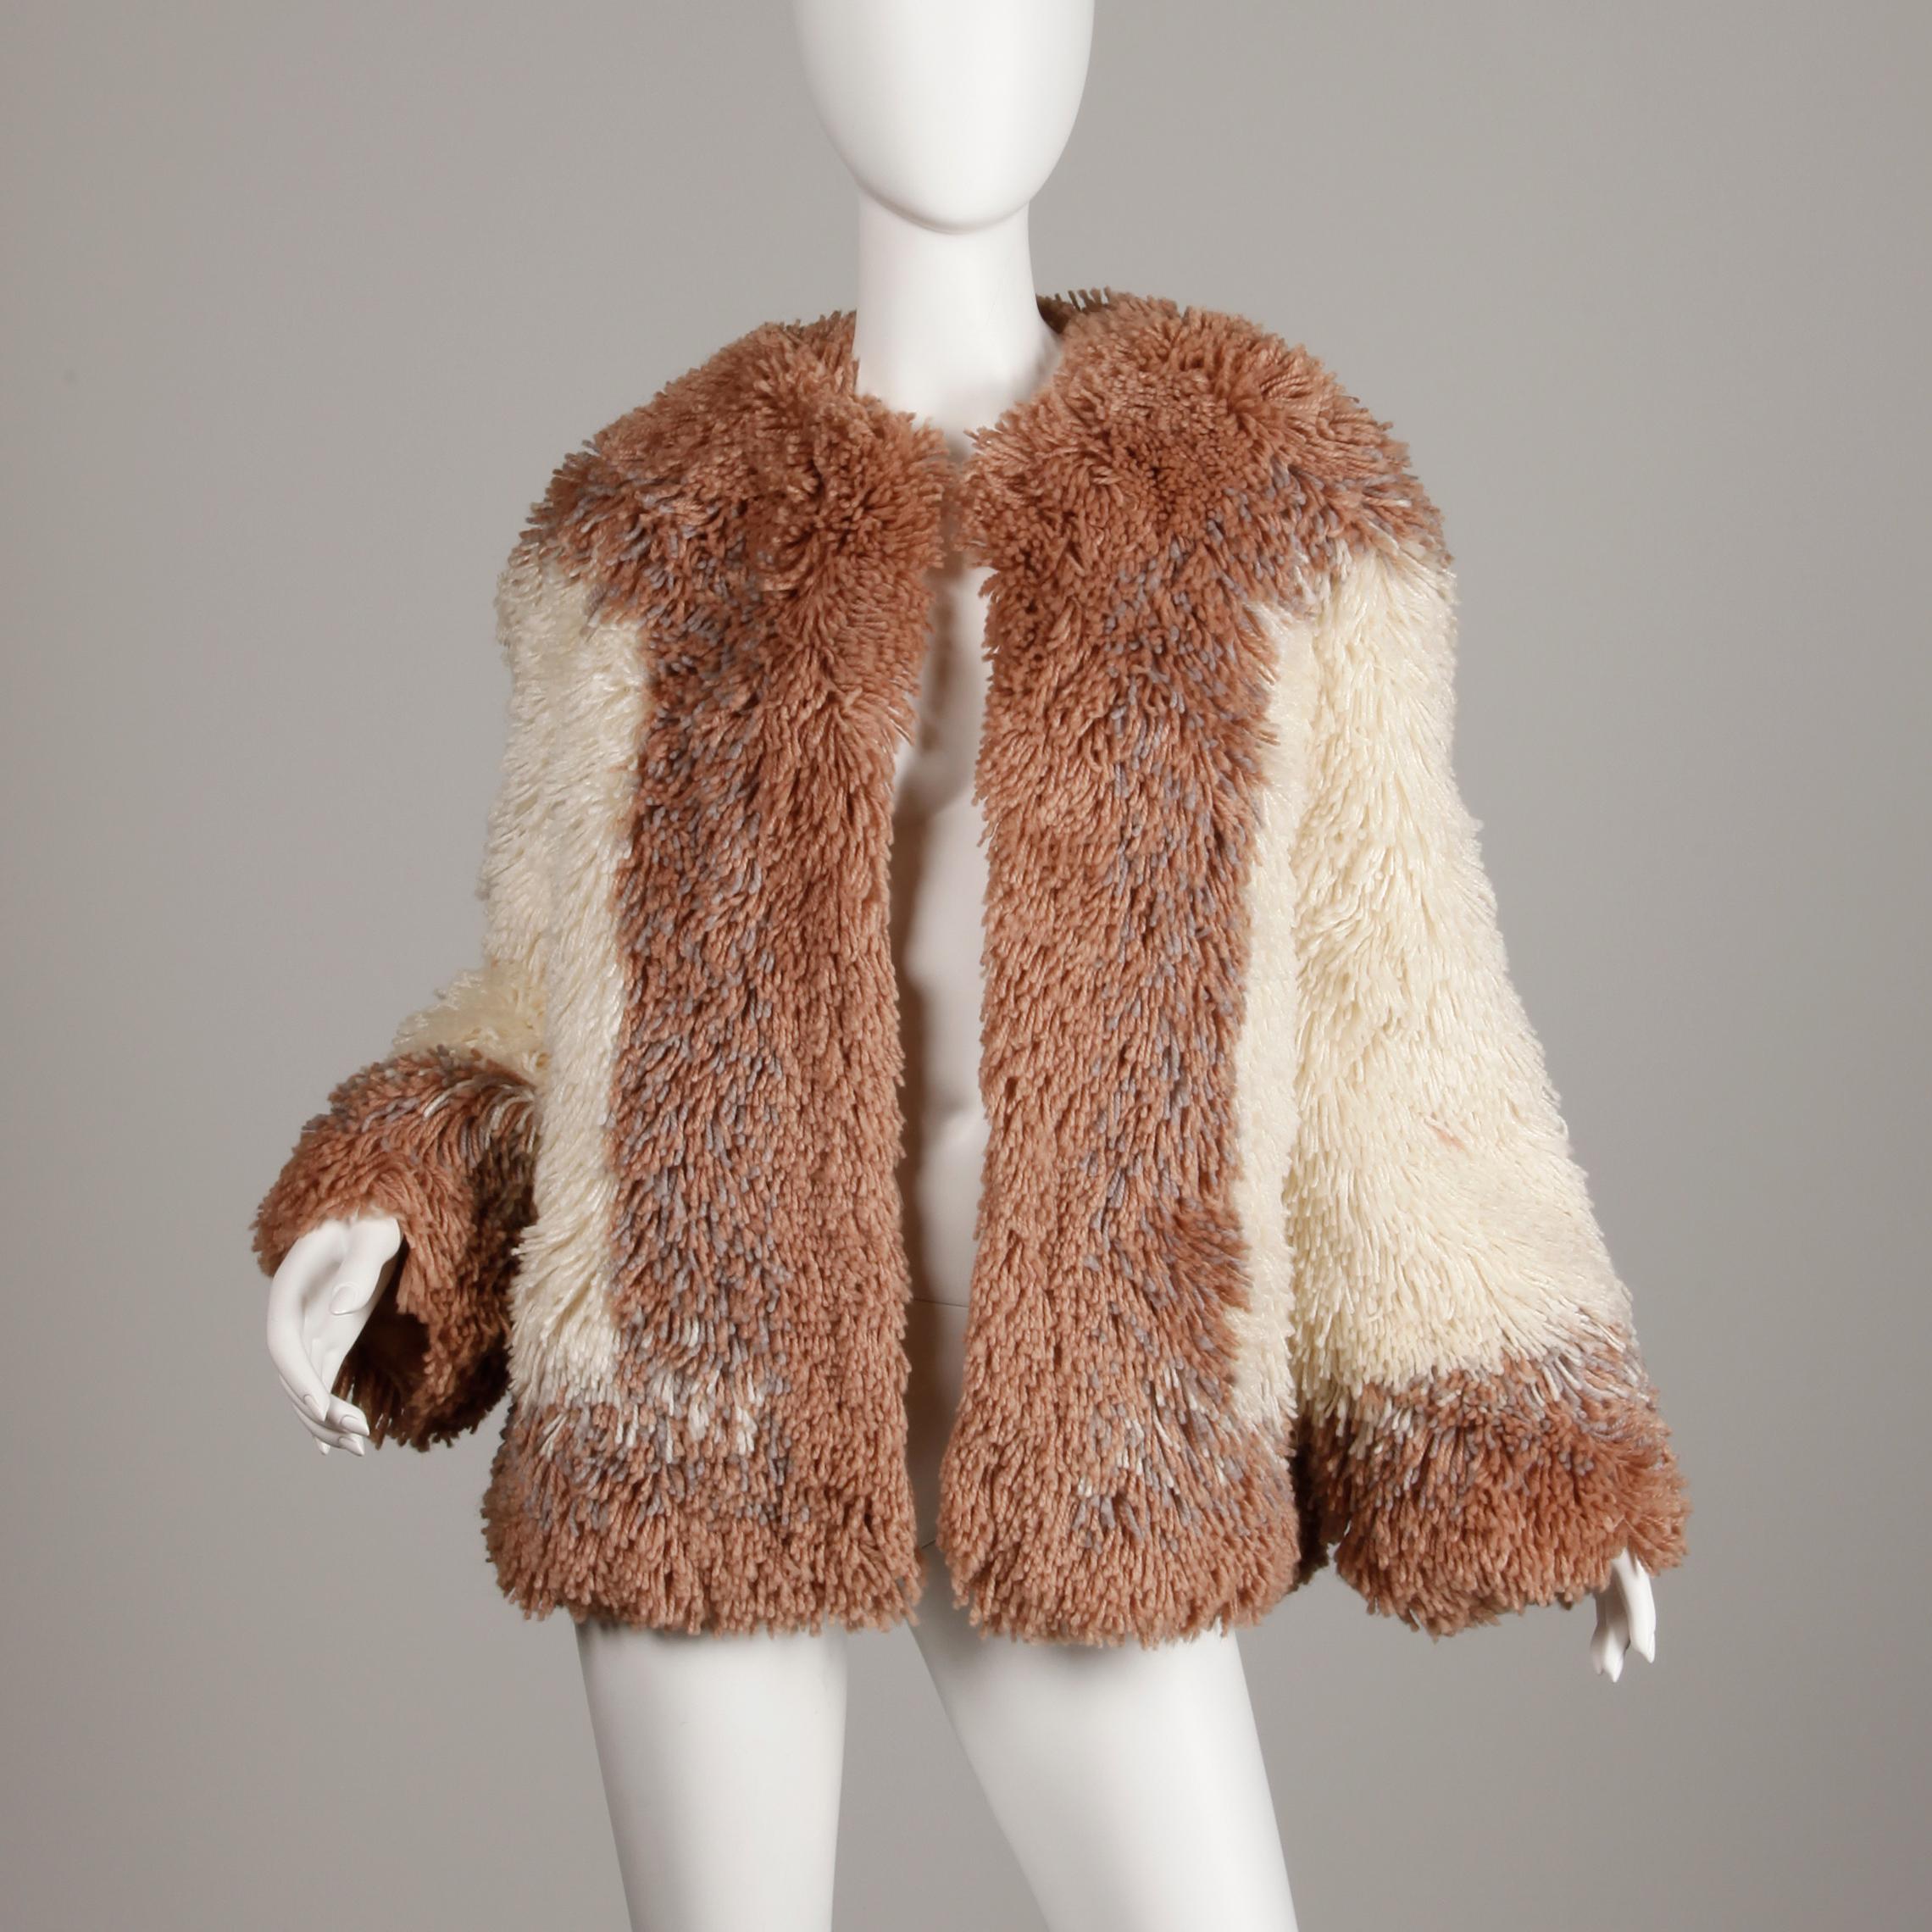 Incredible heavy weight shaggy wool jacket in two tone brown and beige by Judith Ann. A great fur alternative with the same winter warmth! Fully lined with no closure (hangs open). Hidden side pockets. Fits like a modern size large-extra large. The